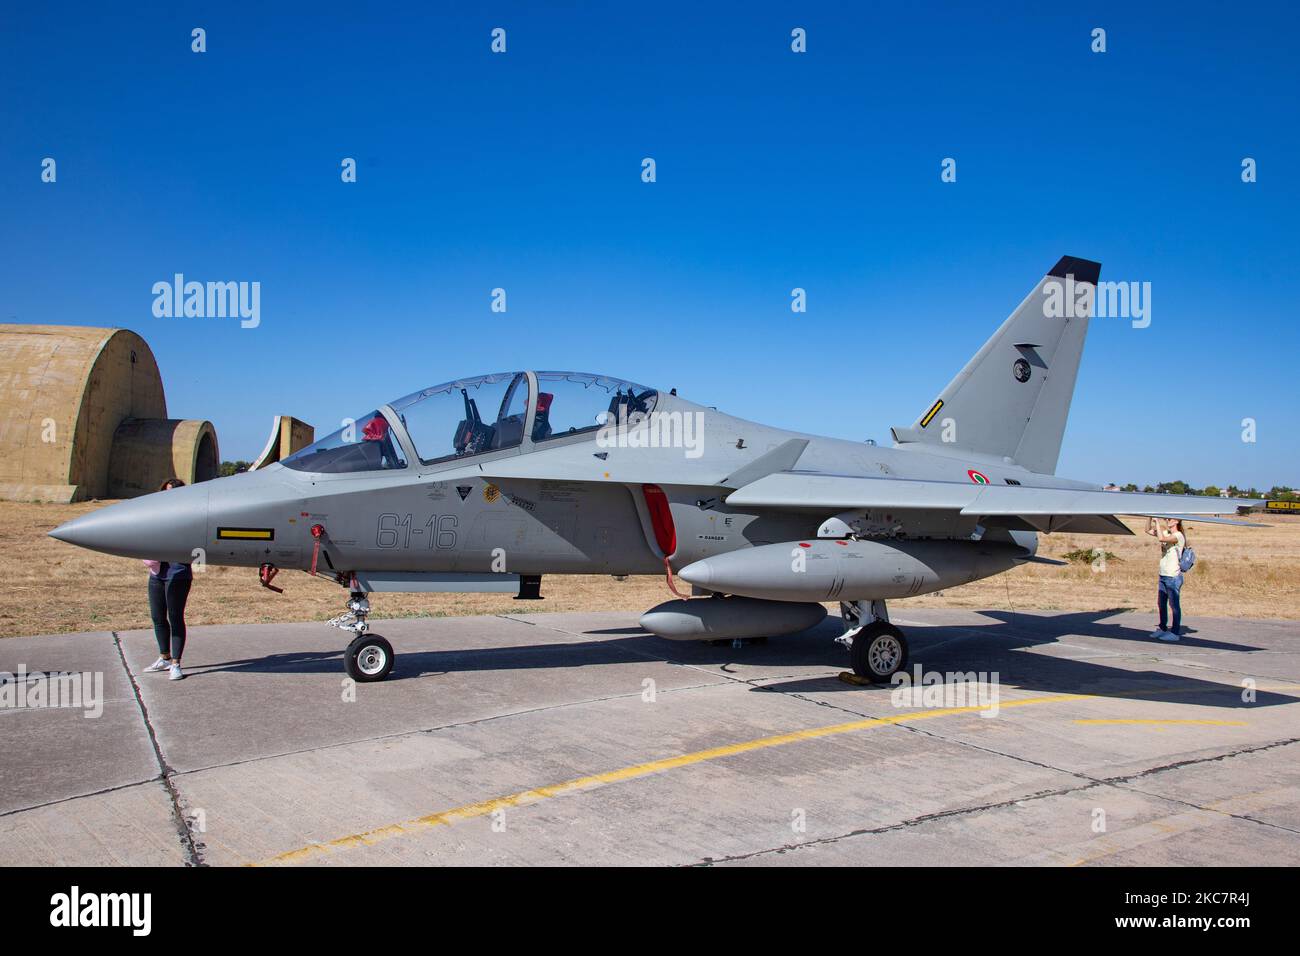 Alenia Aermacchi M-346 Master, a twin engine trainer jet aircraft and light attack of the Italian Air Force as seen on display parked at the tarmac in Tanagra LGTG Air Base near Athens During the Athens Flying Week 2019 Air show. The military jet is made in Italy by Alenia Aermacchi and Leonardo. The Hellenic Air Force HAF announced in January 2021 plans to acquire 10 of the Israeli M-346 Lavi variants for use as trainers in a new flight school. Tanagra Airport, Attika, Greece on September 2019 (Photo by Nicolas Economou/NurPhoto) Stock Photo